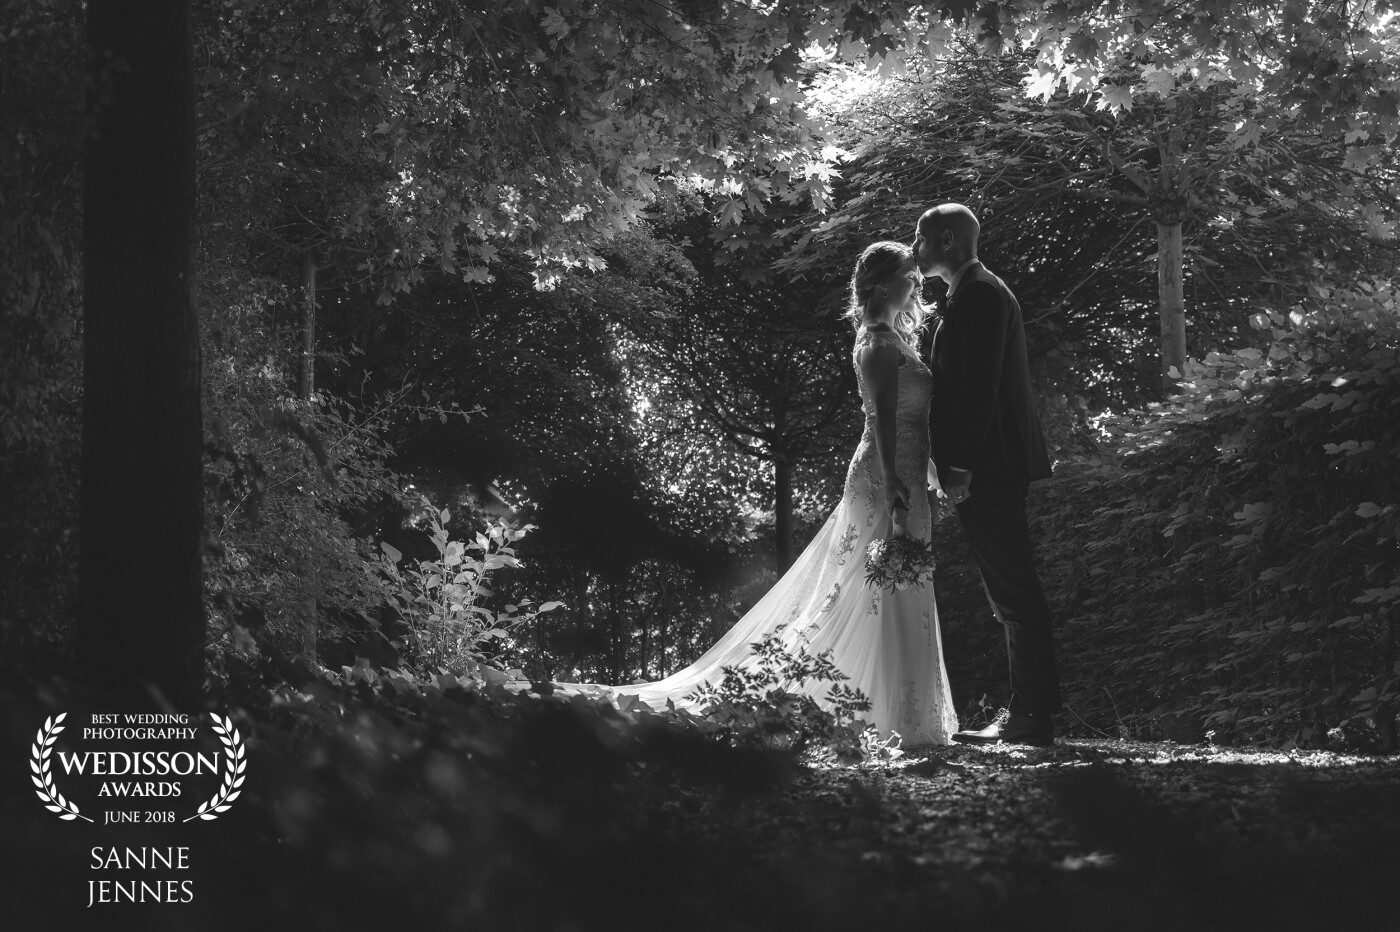 We found this beautiful romantic spot on the grounds of their wedding location, only a little bit of light was able to come through were there were no leaves...